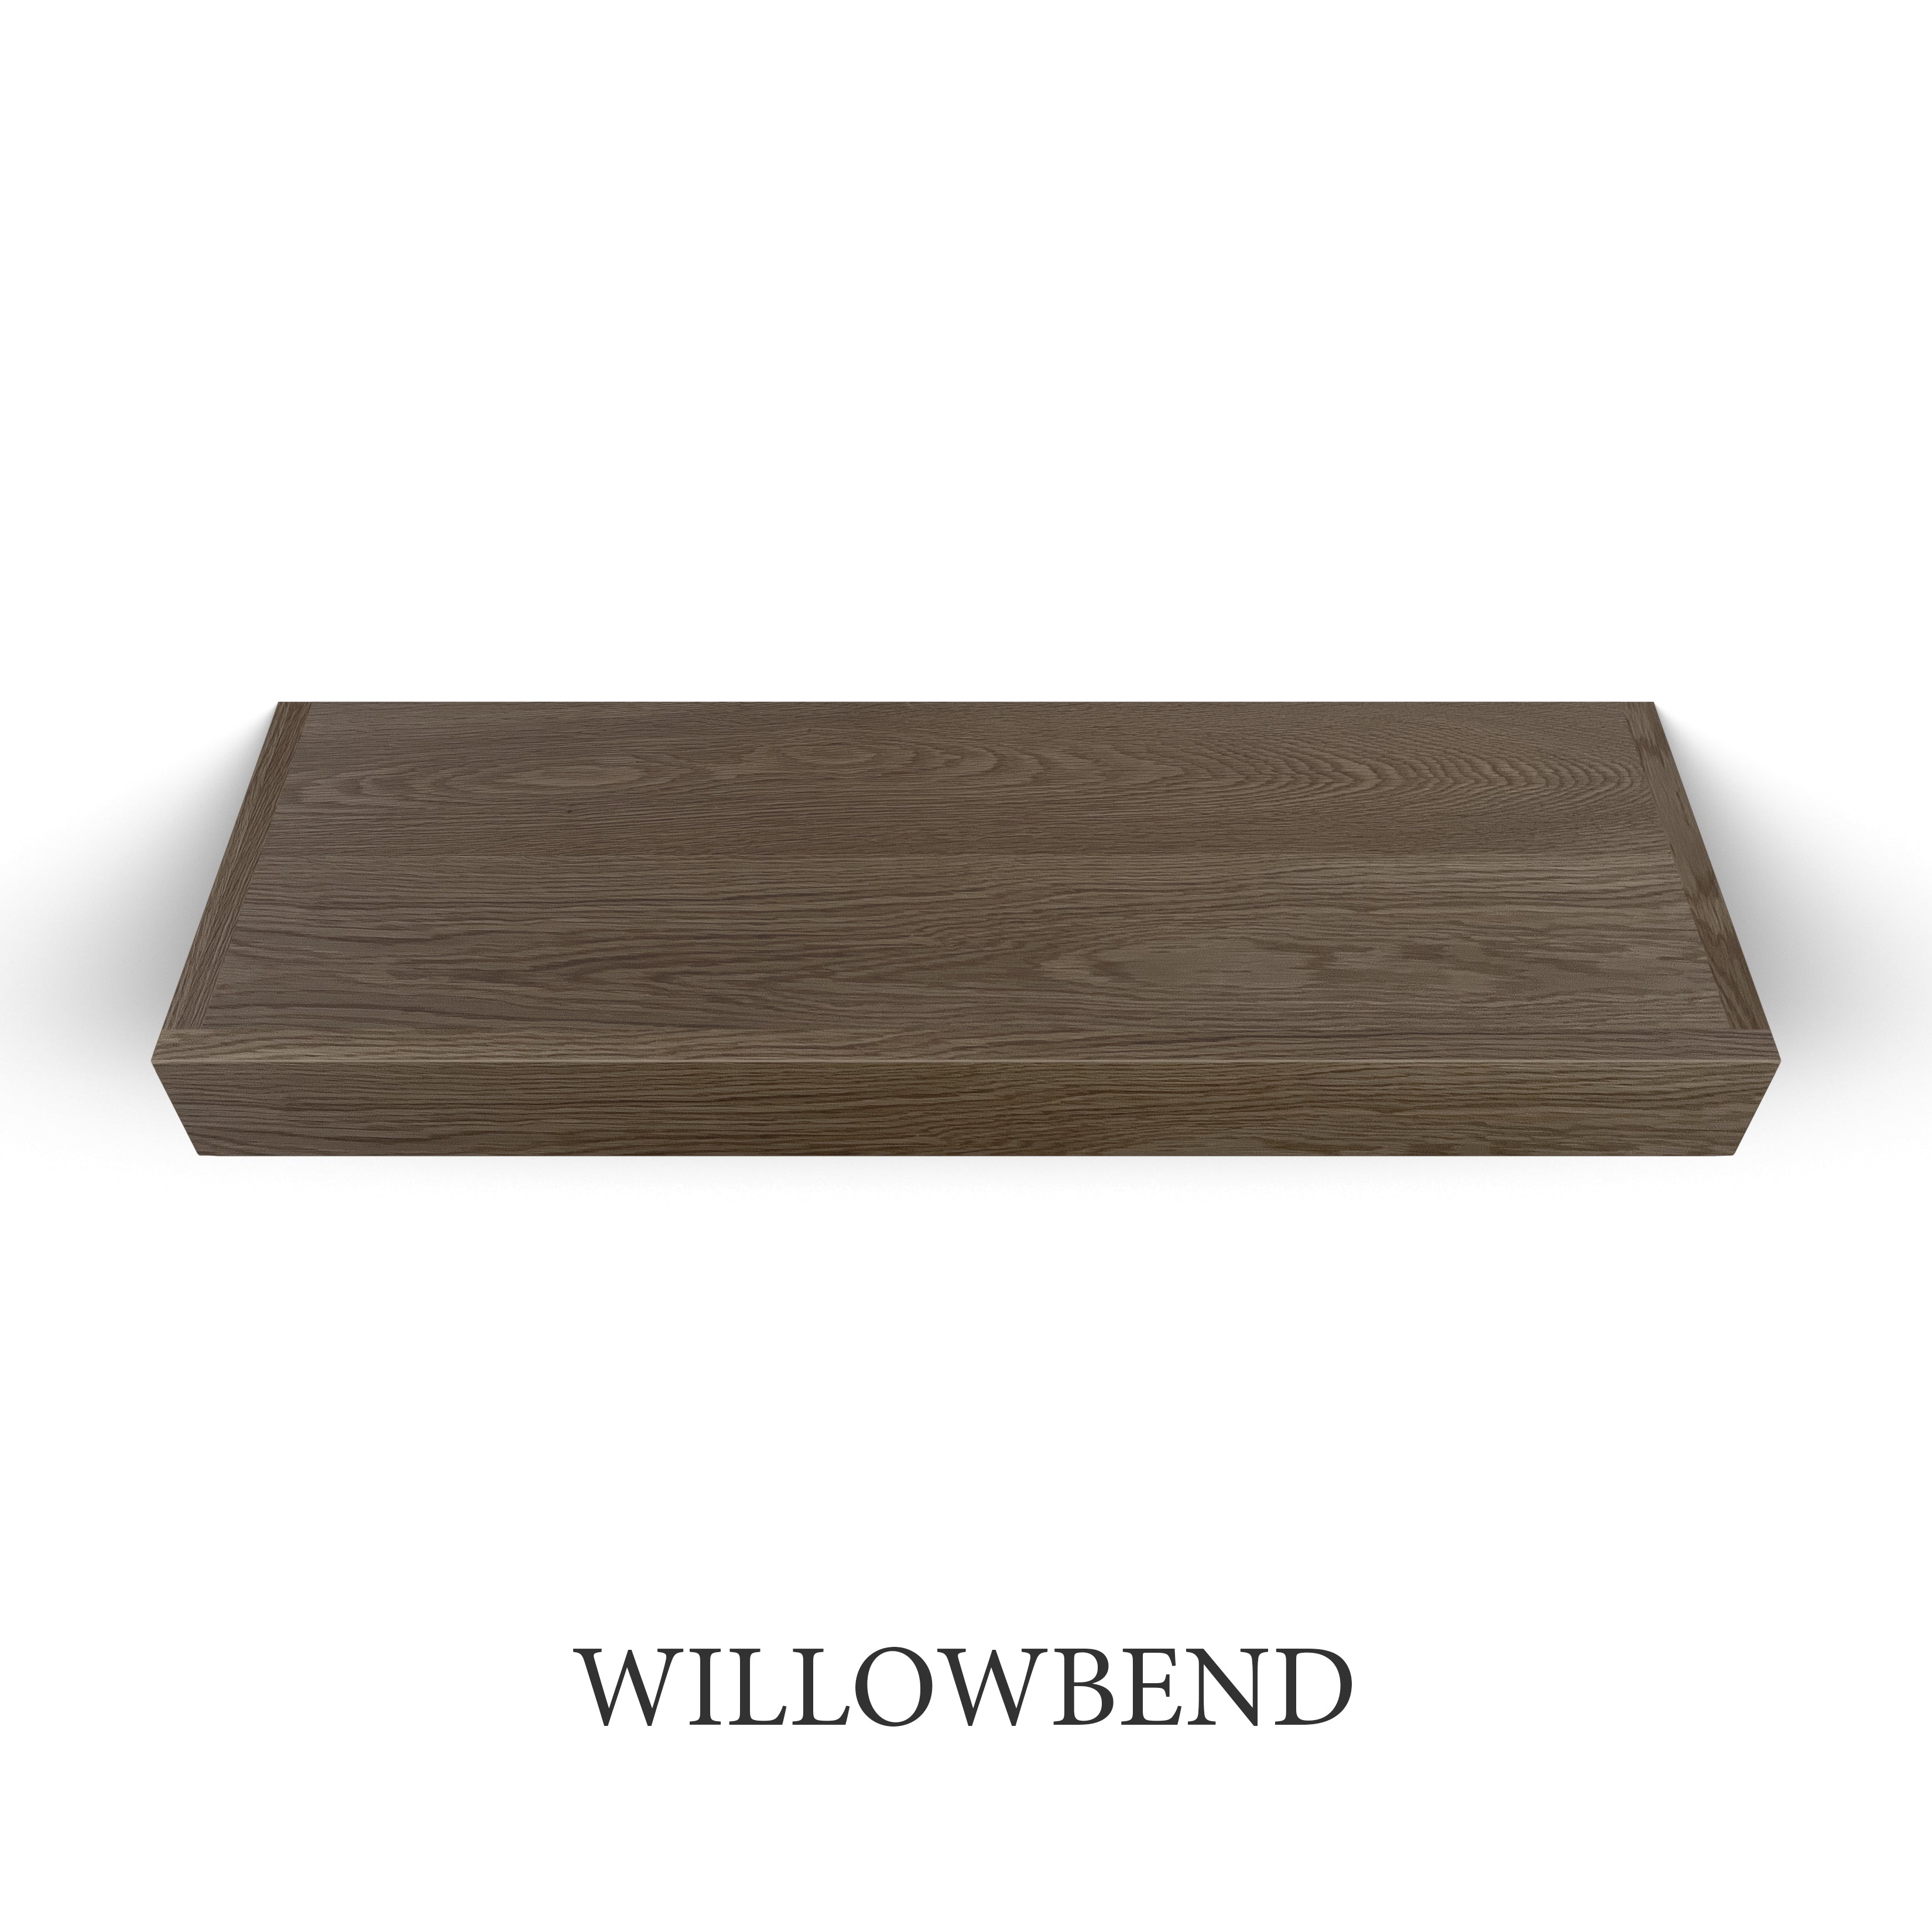 willowbend White Oak 3 Inch Thick Floating Shelf